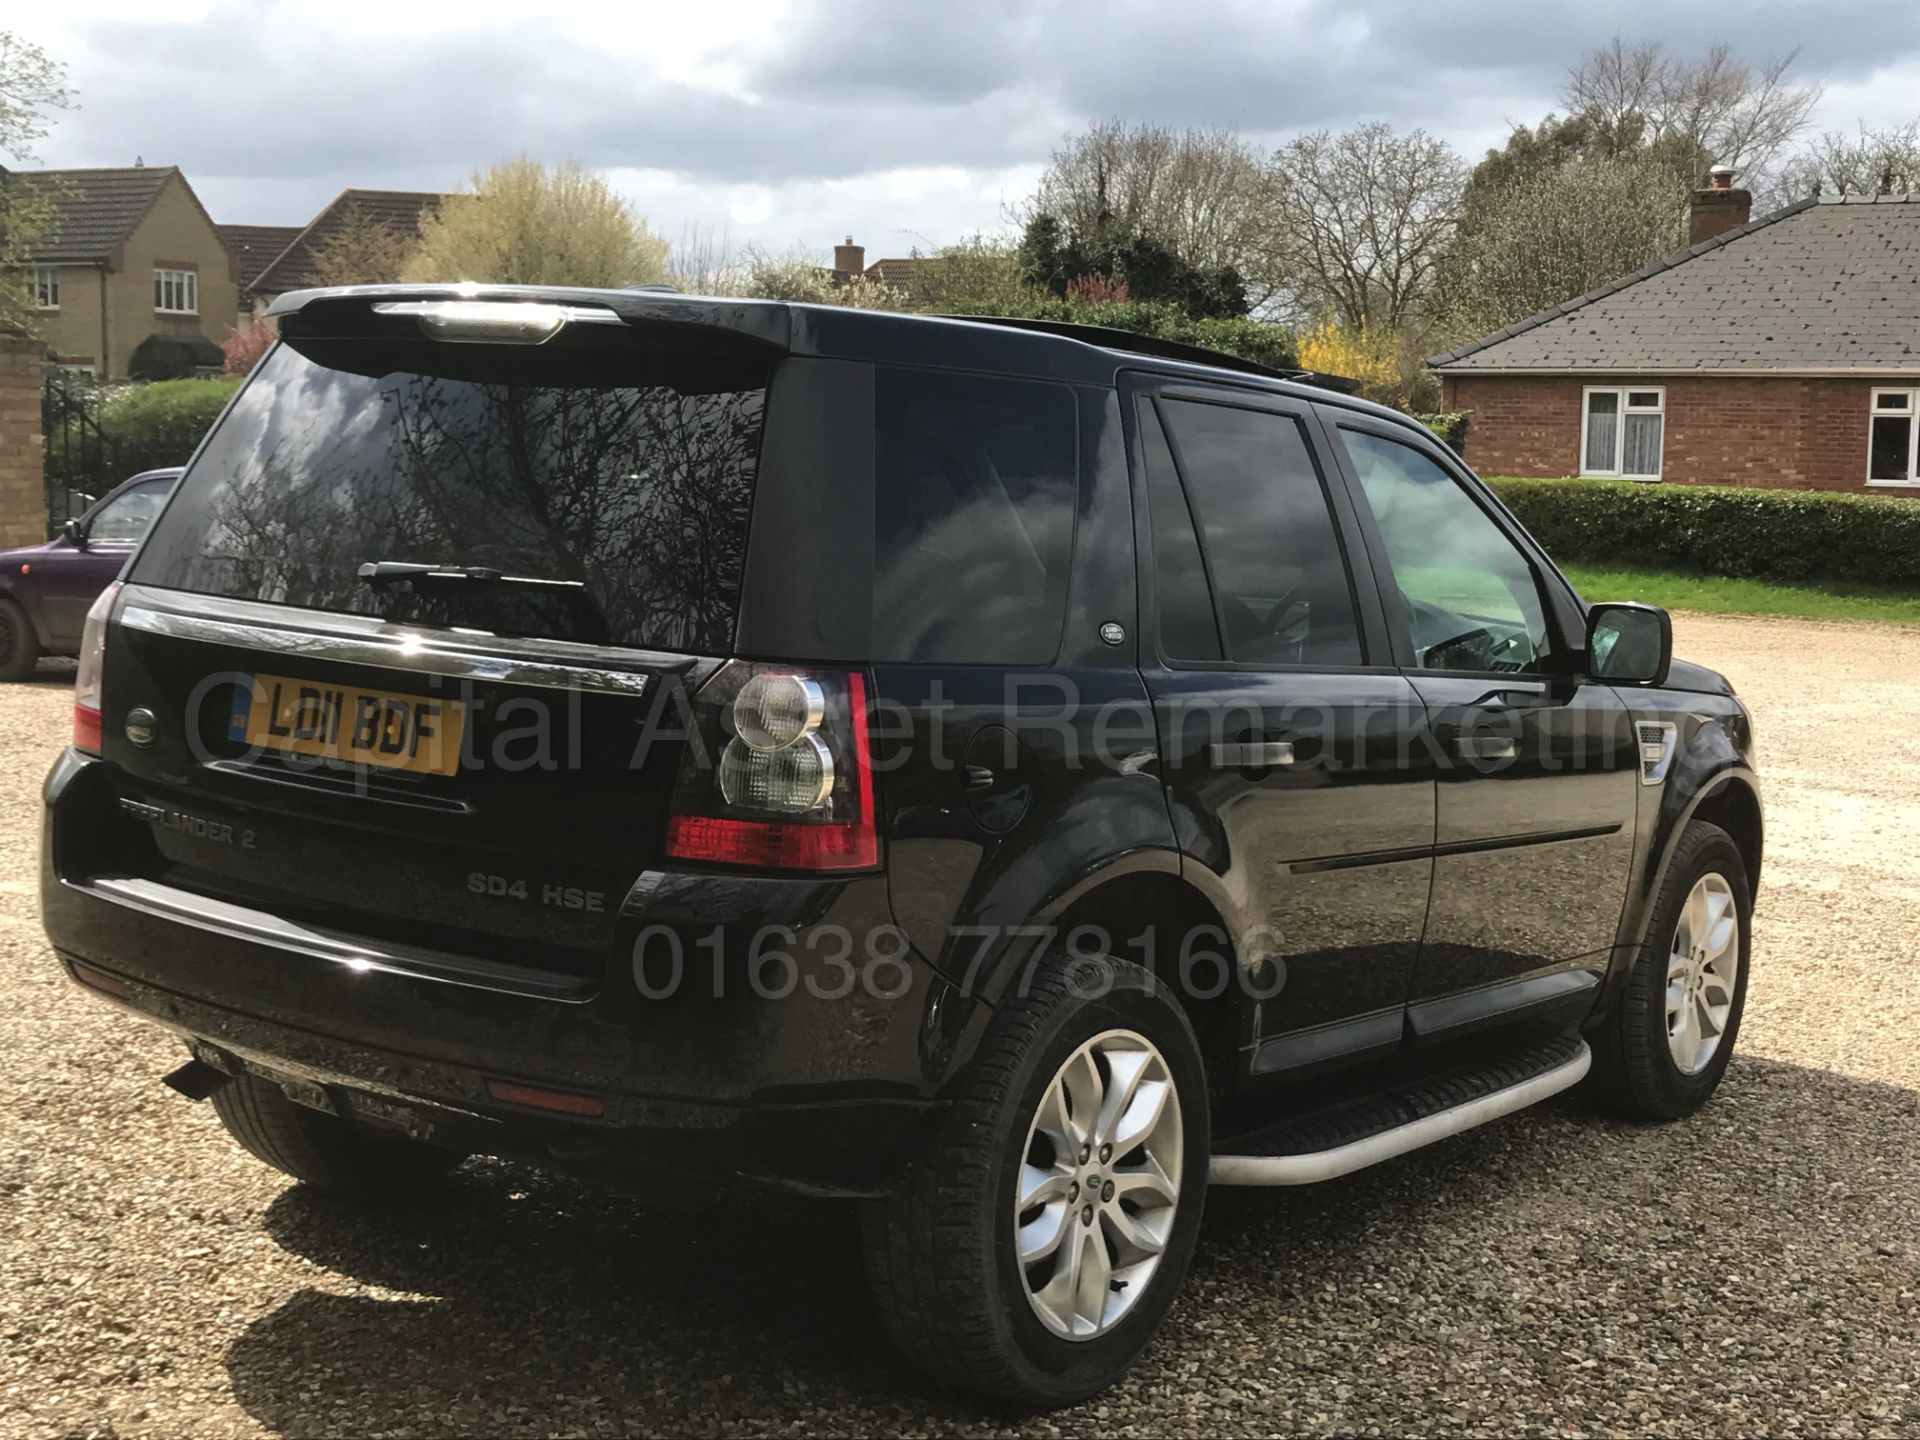 (On Sale) LAND ROVER FREELANDER 'HSE EDITION' (2011) '2.2 SD4 - AUTO' *SAT NAV - LEATHER - PAN ROOF* - Image 10 of 45